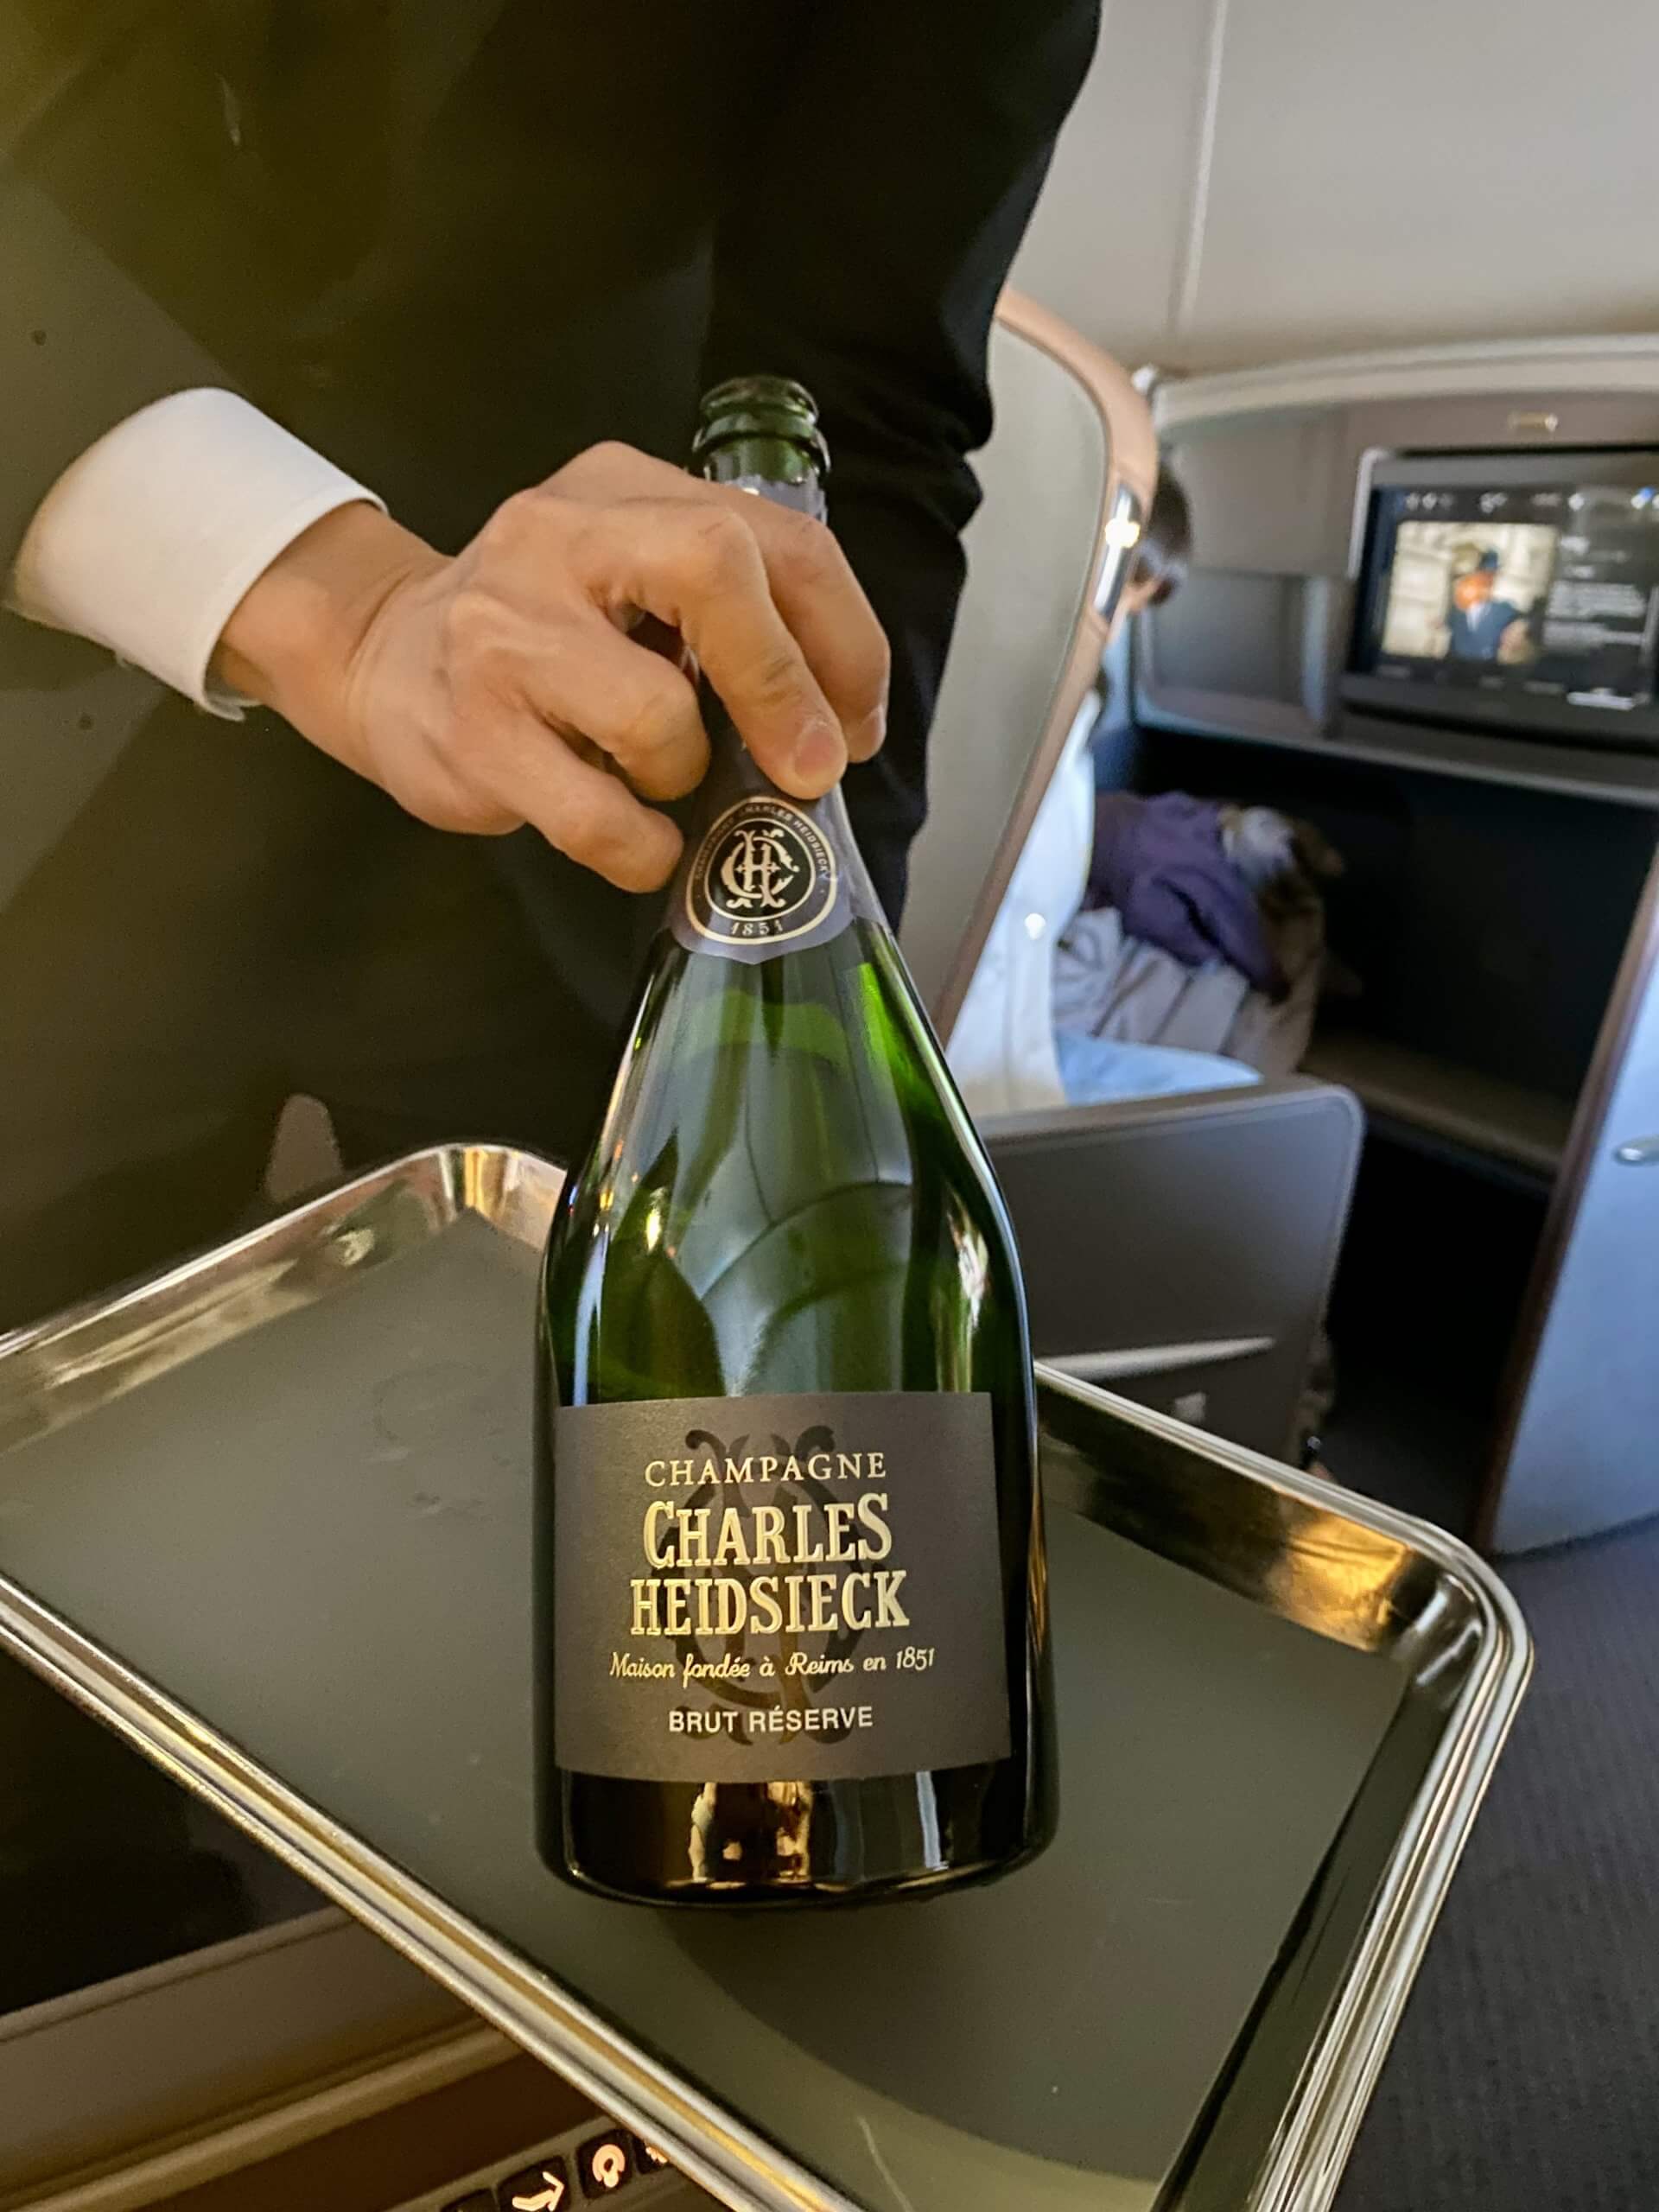 Champagne Charles Heidsieck Singapore Airlines Business Class